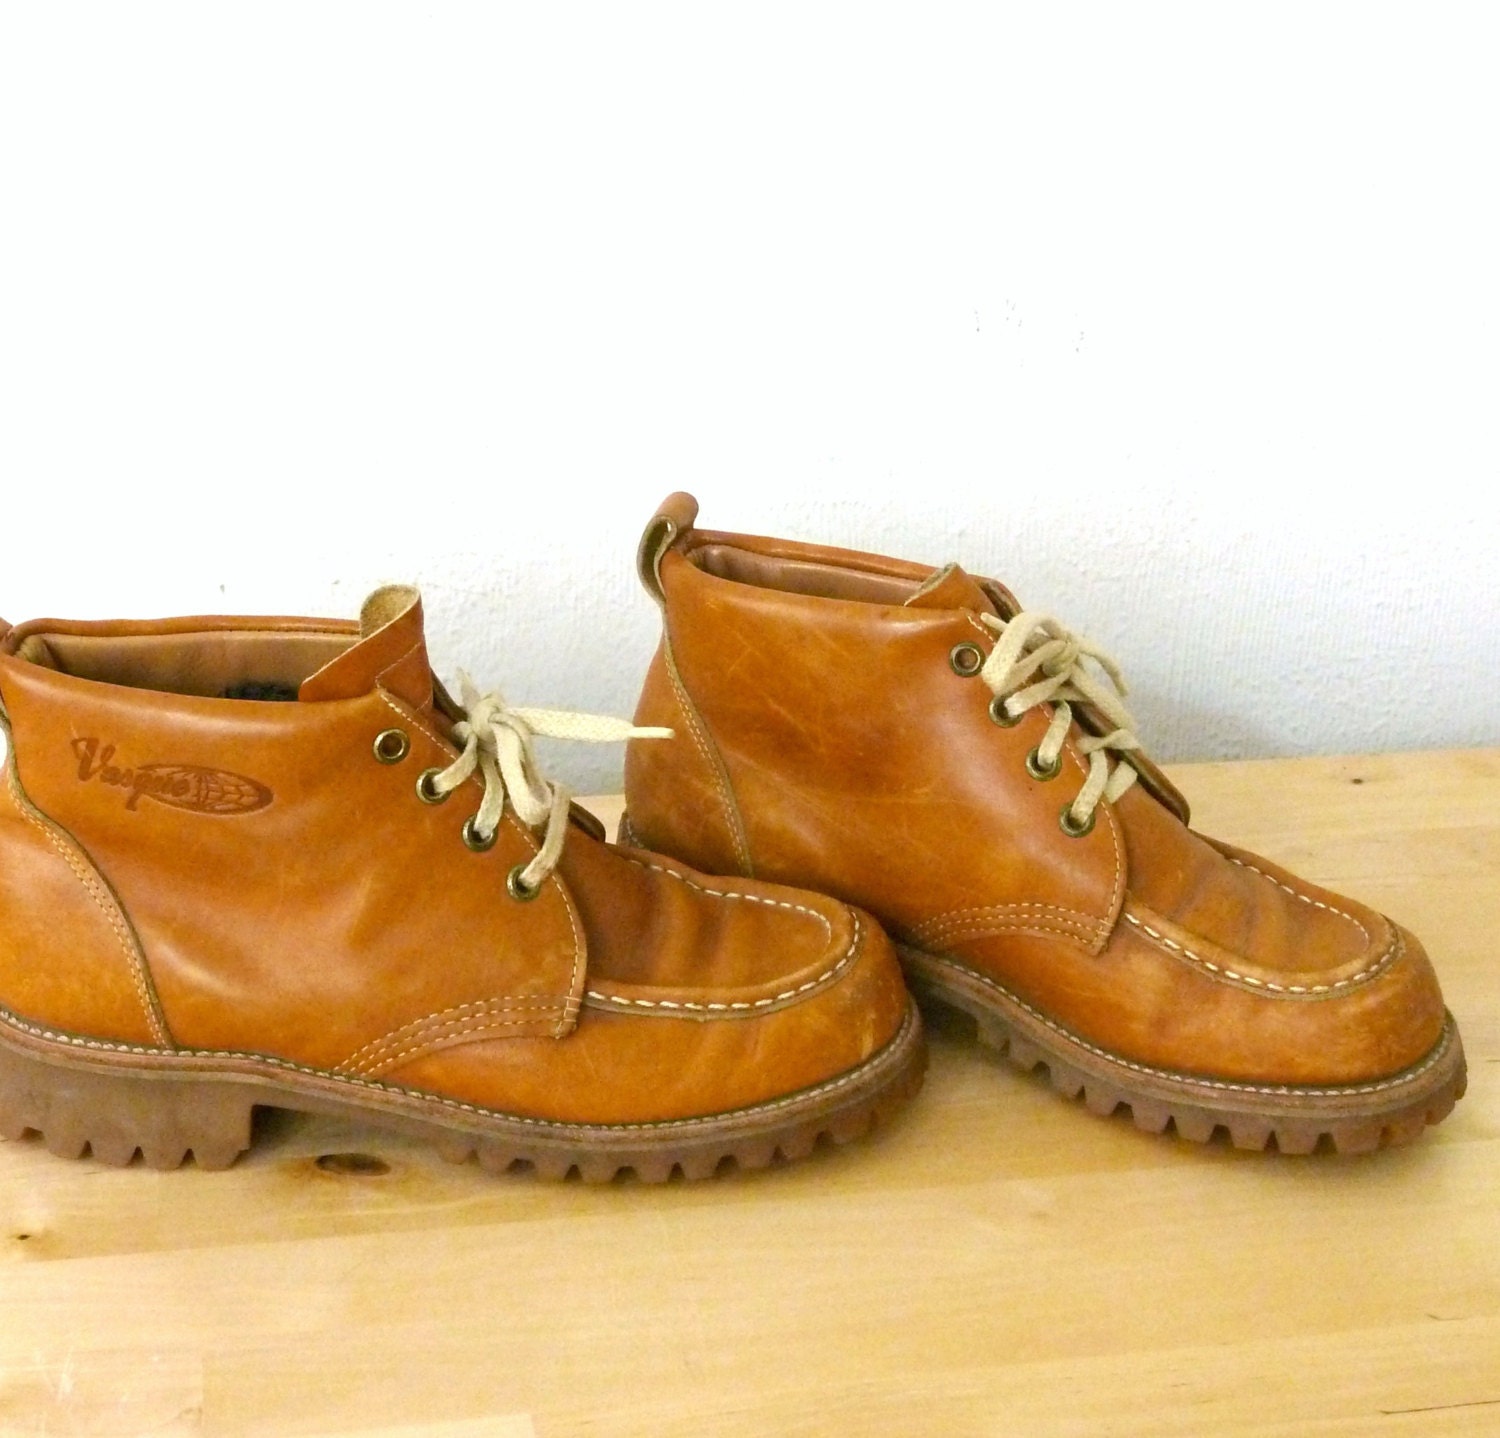 Vintage Womens Chukka Boot / Leather Hiking Boots / Tan Lace